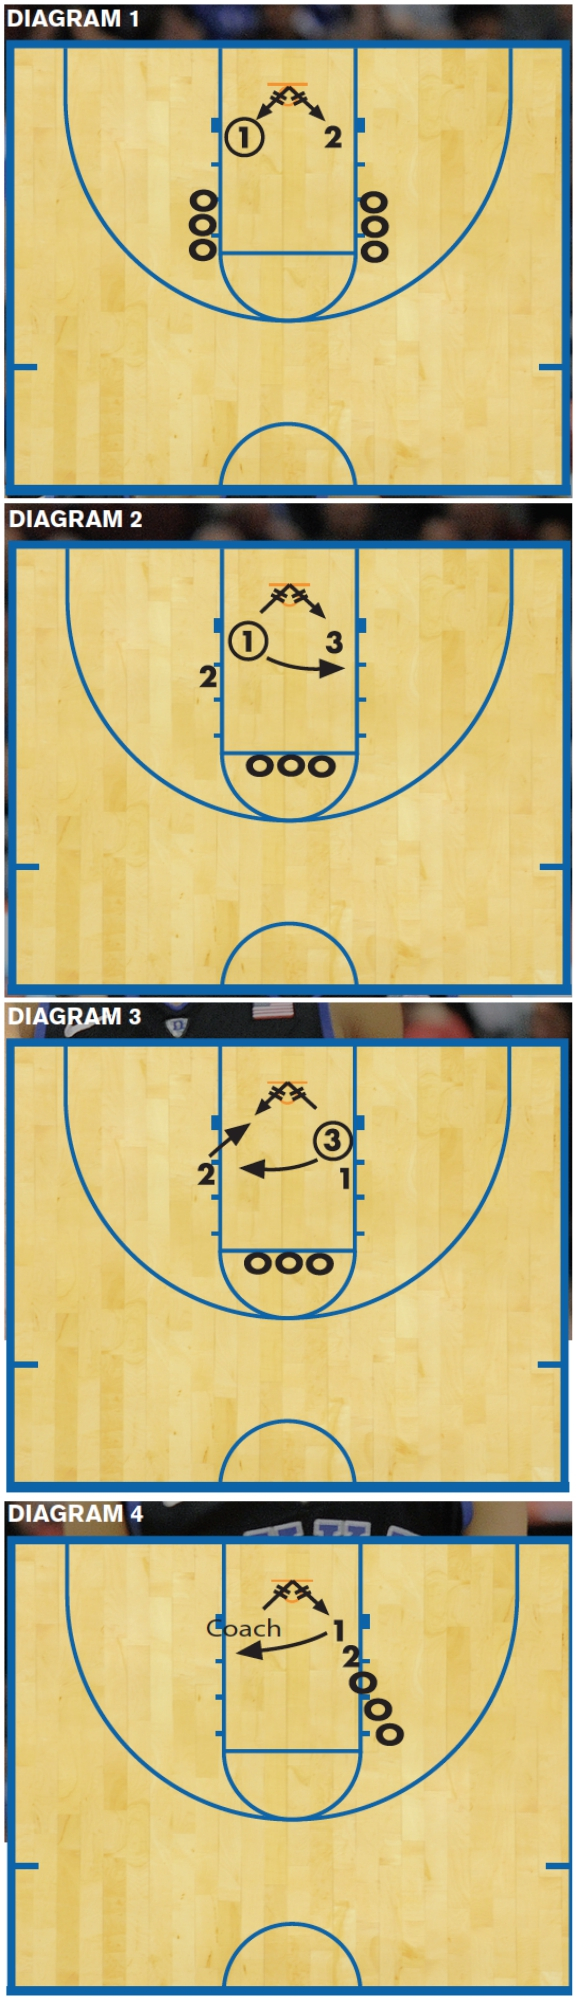 Triangle Offense Diagram Six Drills To Improve Offensive Rebounding Winning Hoops